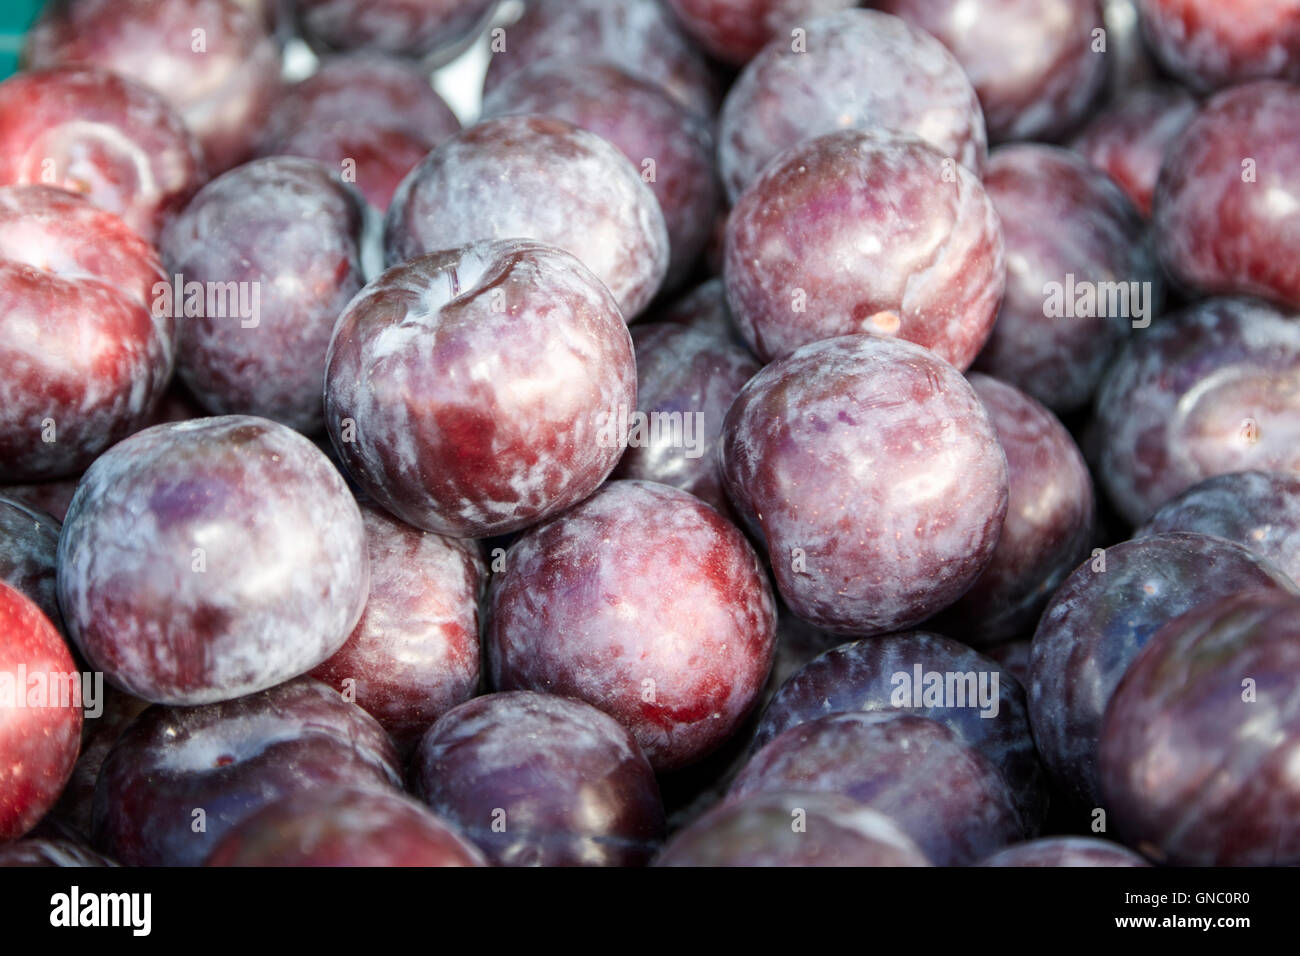 fresh plums on display on a greengrocers food stall in the uk Stock Photo